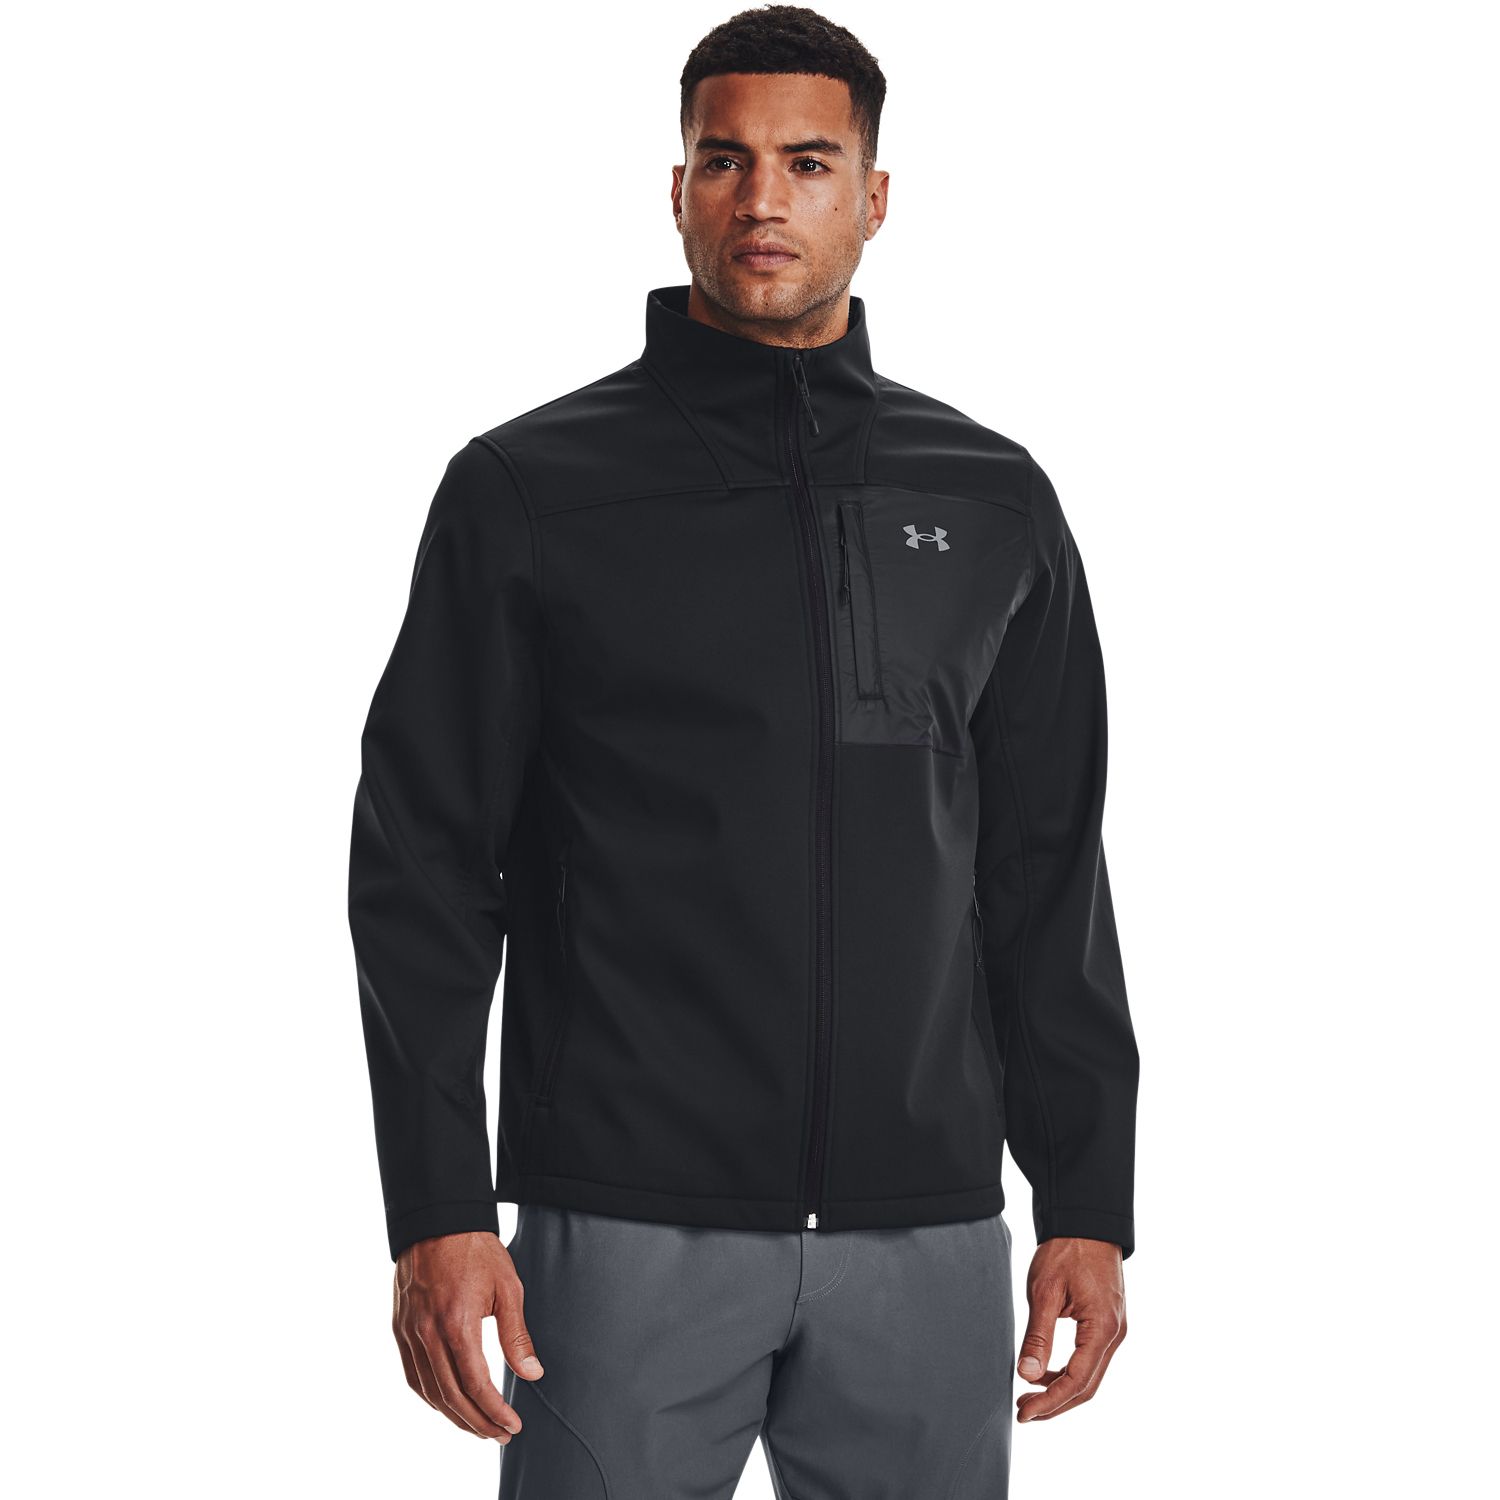 Under Armour Coat Mens Clearance, 55% OFF | empow-her.com